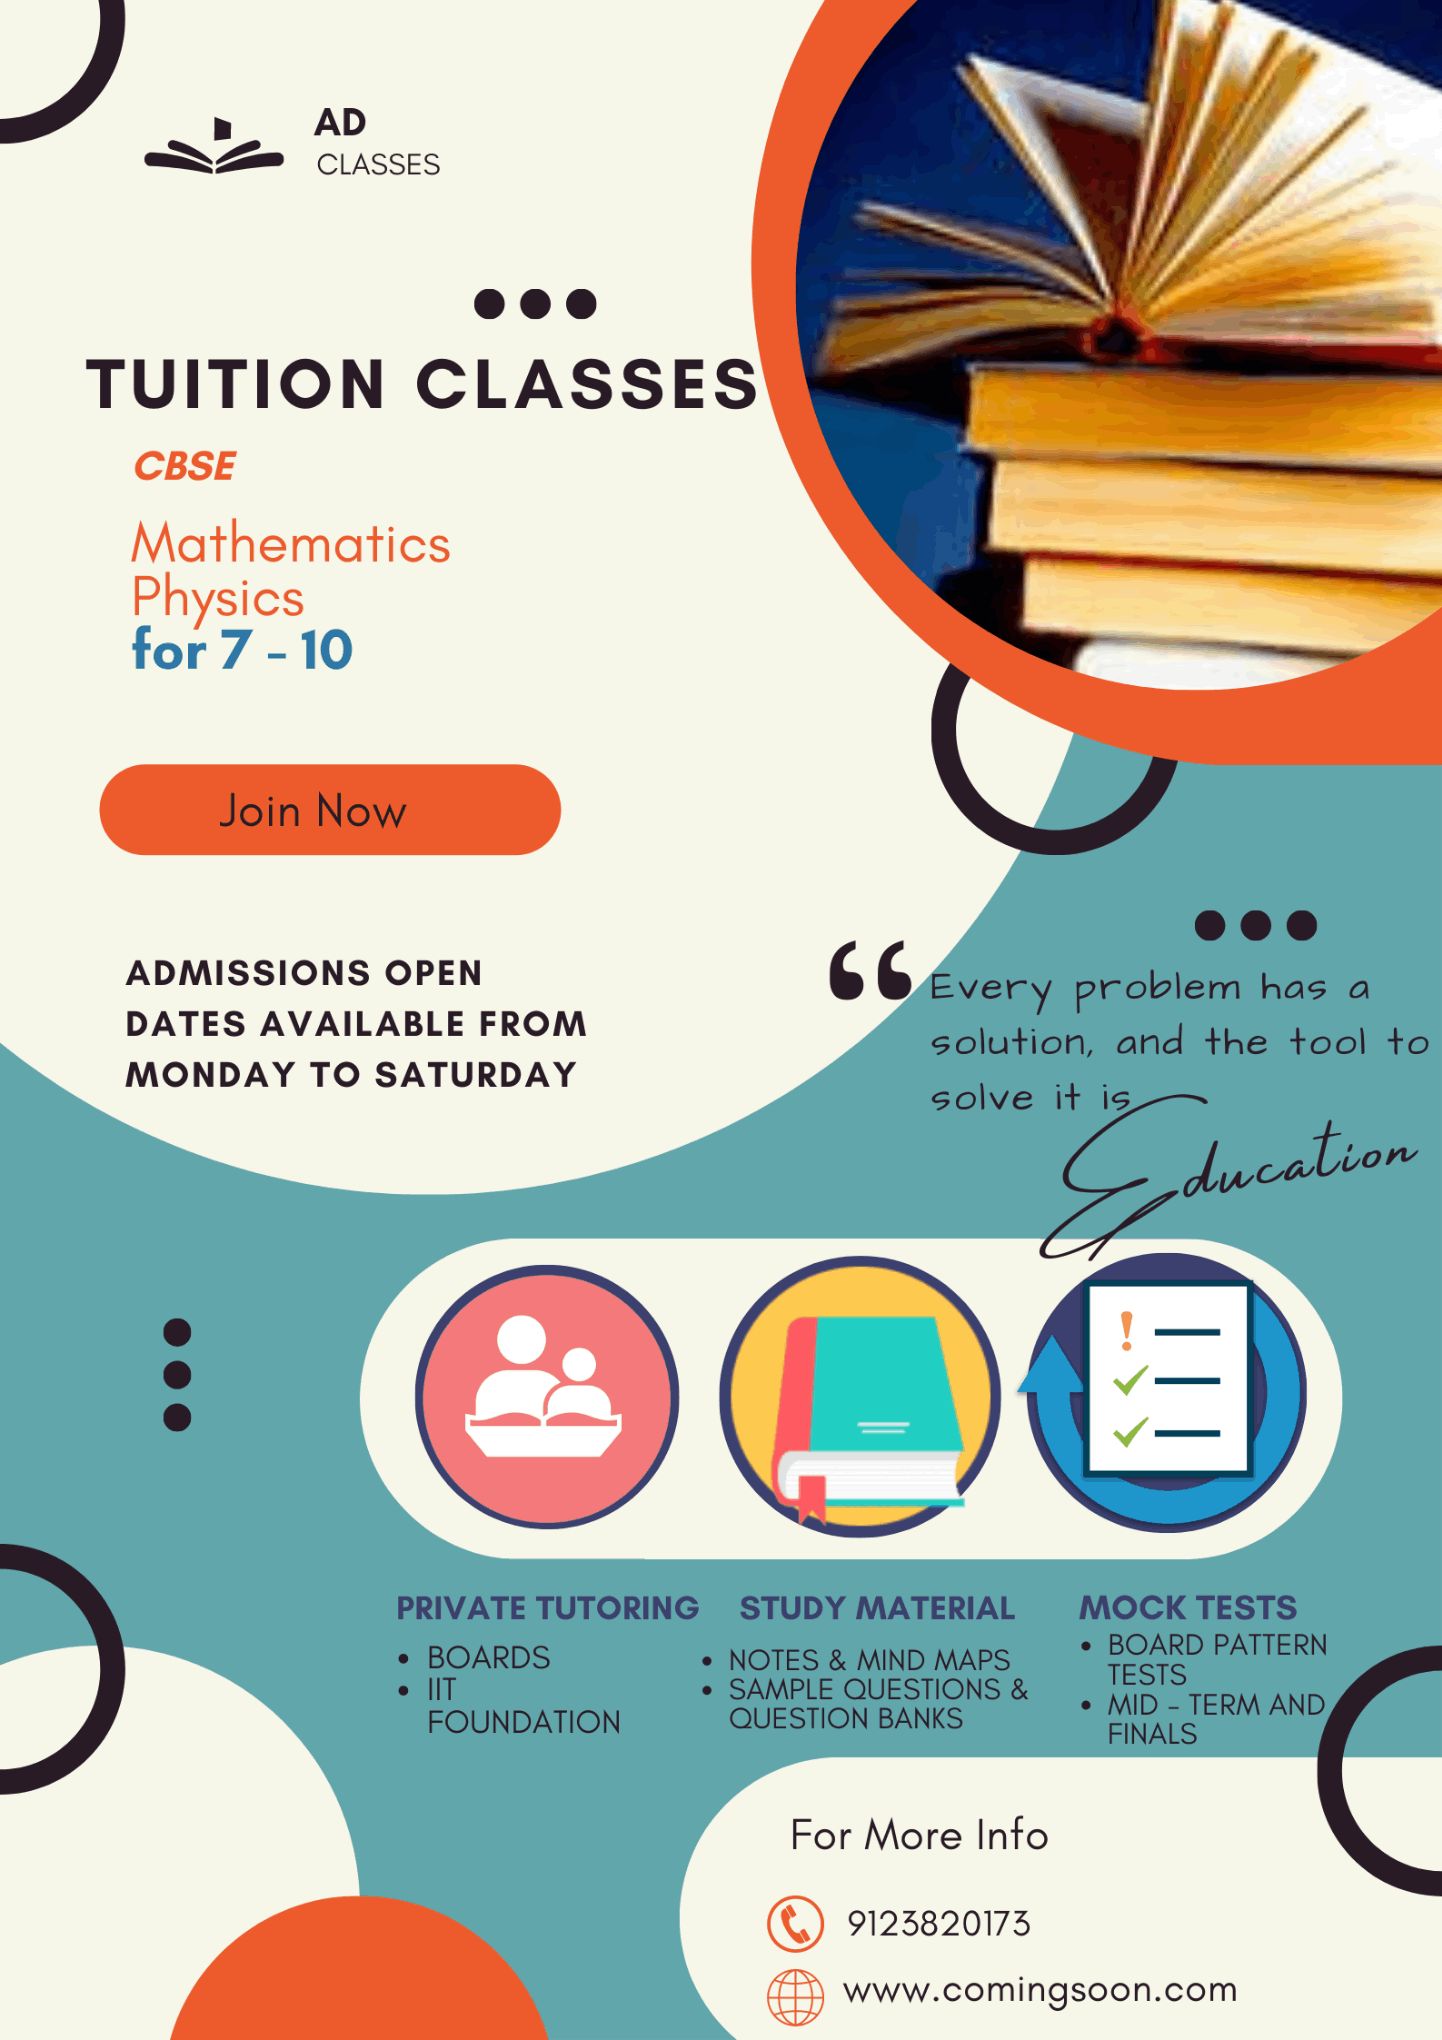 Class 9th/ 10th Tuition, Mathematics, Middle Class (6th -8th) Tuition, Physics; Exp: More than 15 year